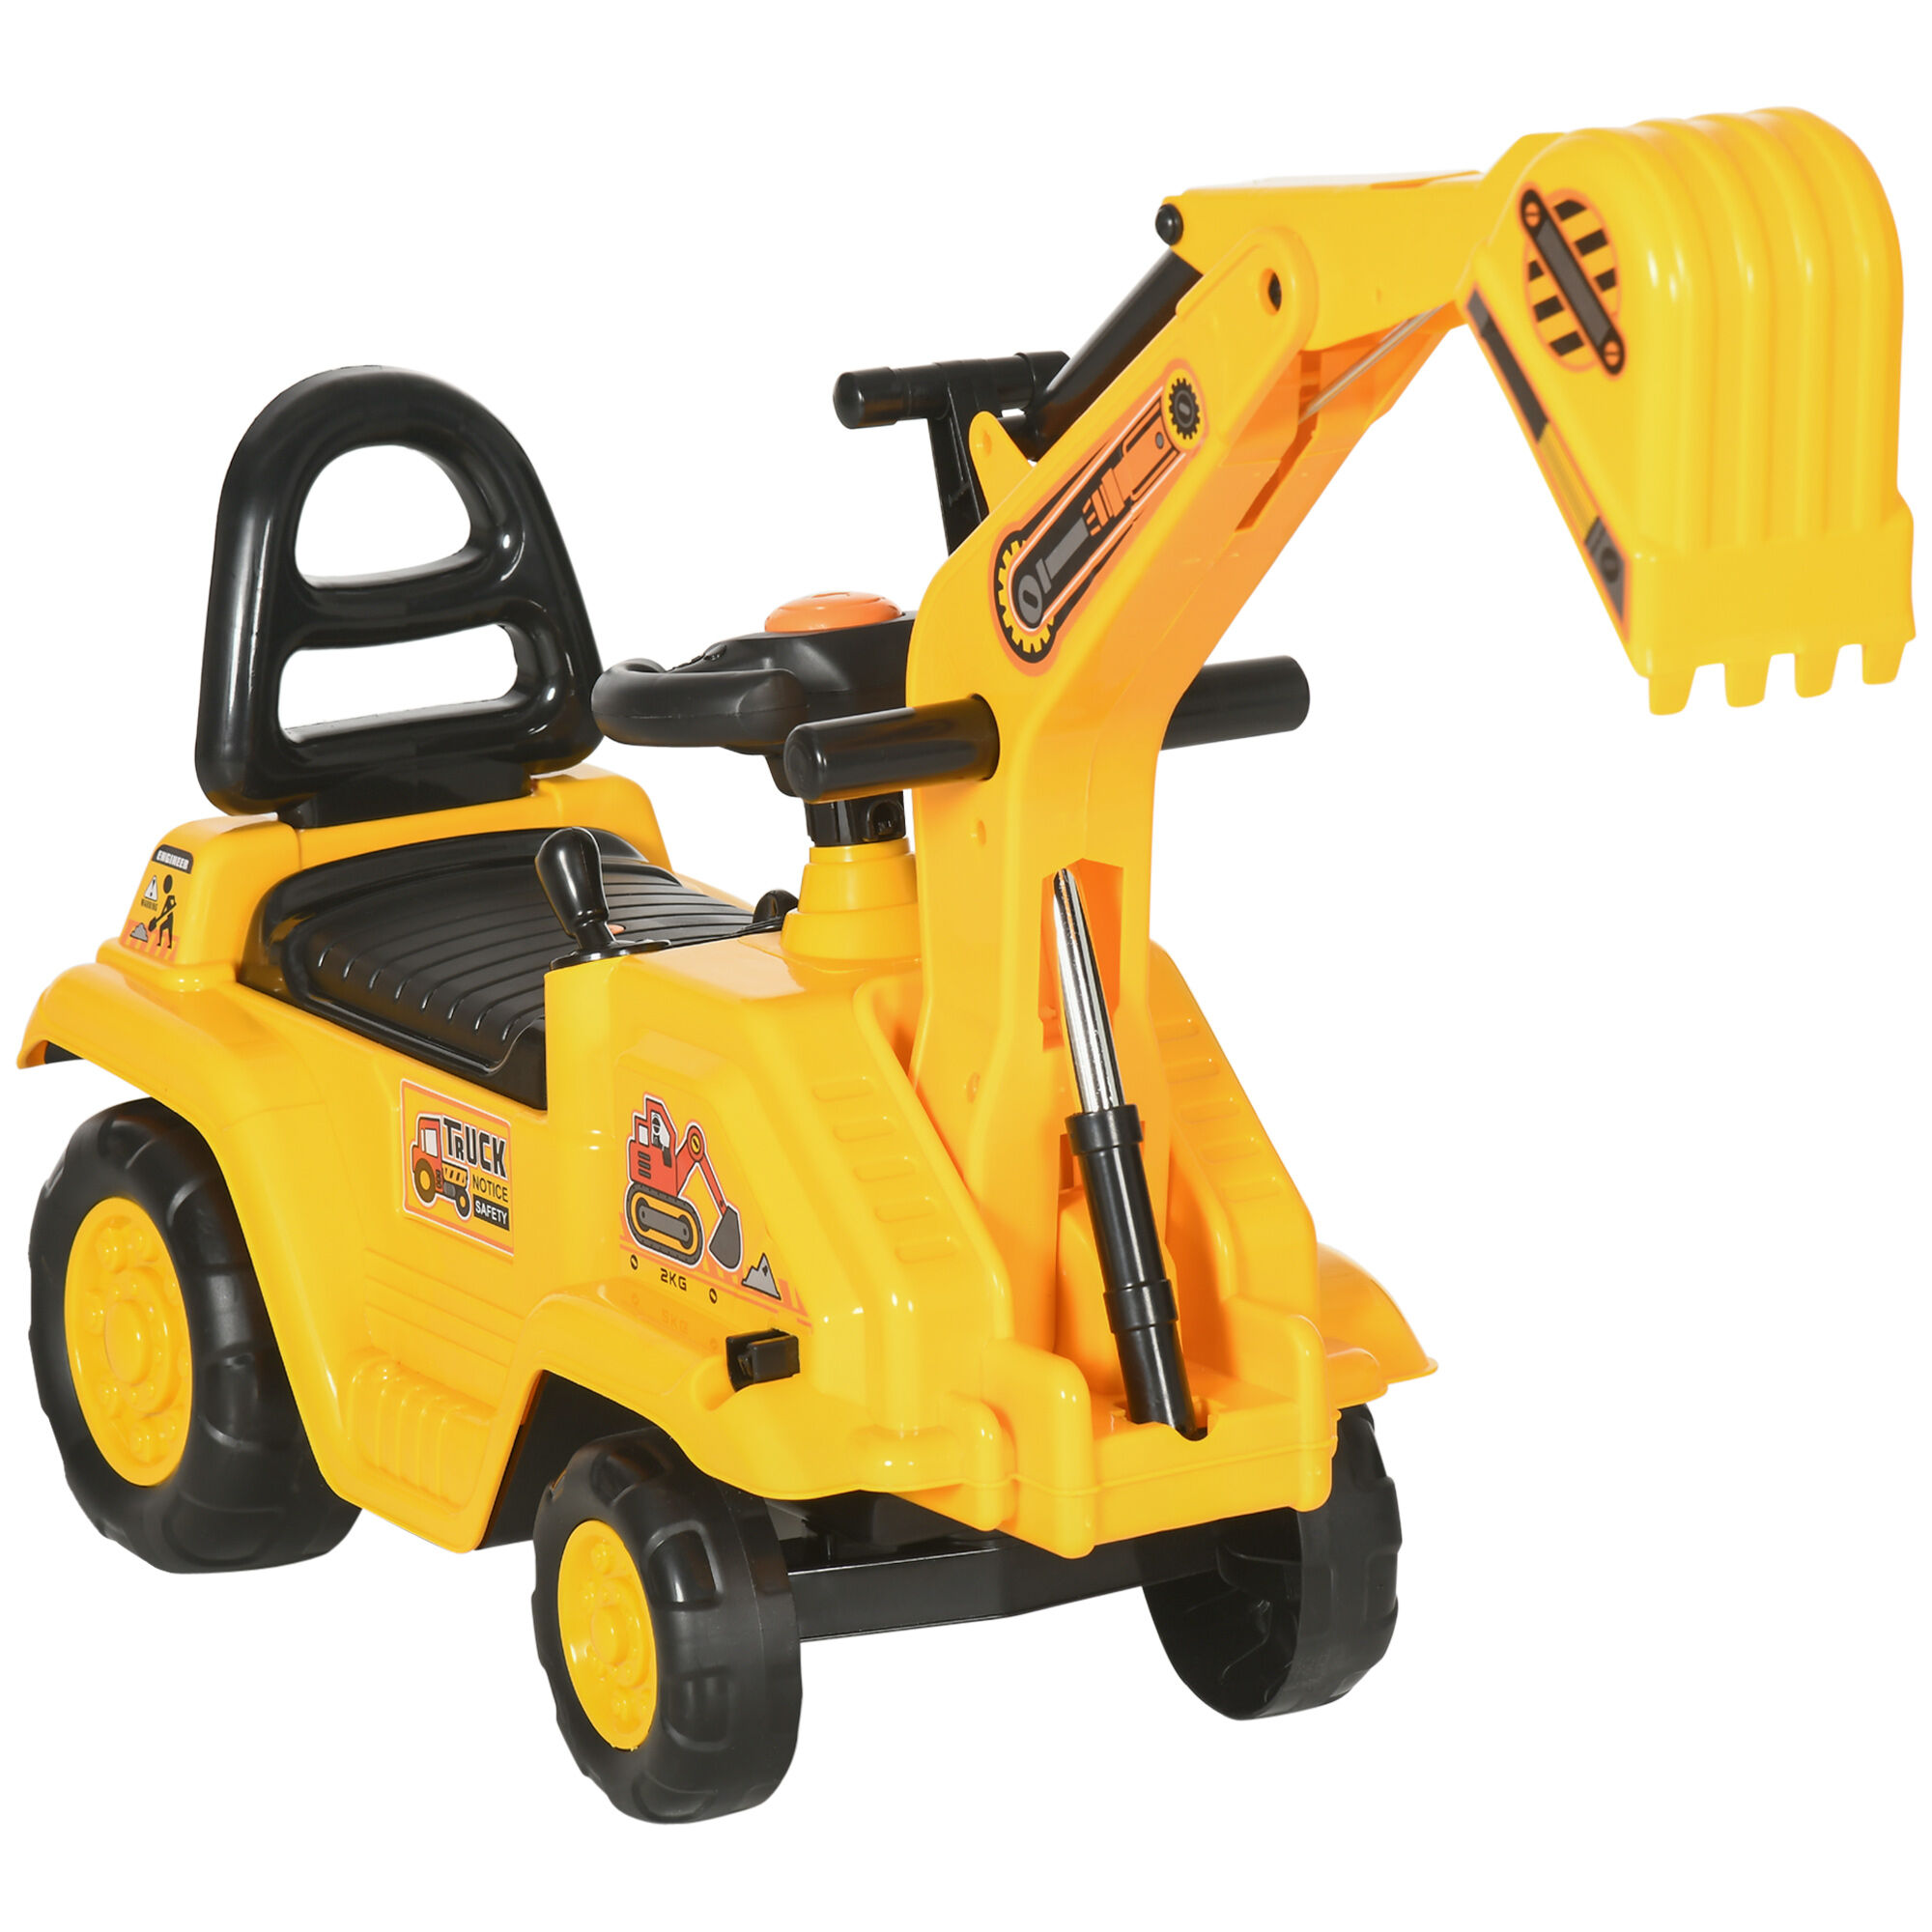 HOMCOM 3-in-1 Ride On Excavator Digger Scooter & Pulling Cart Construction Pretend Play Toy   Aosom.com